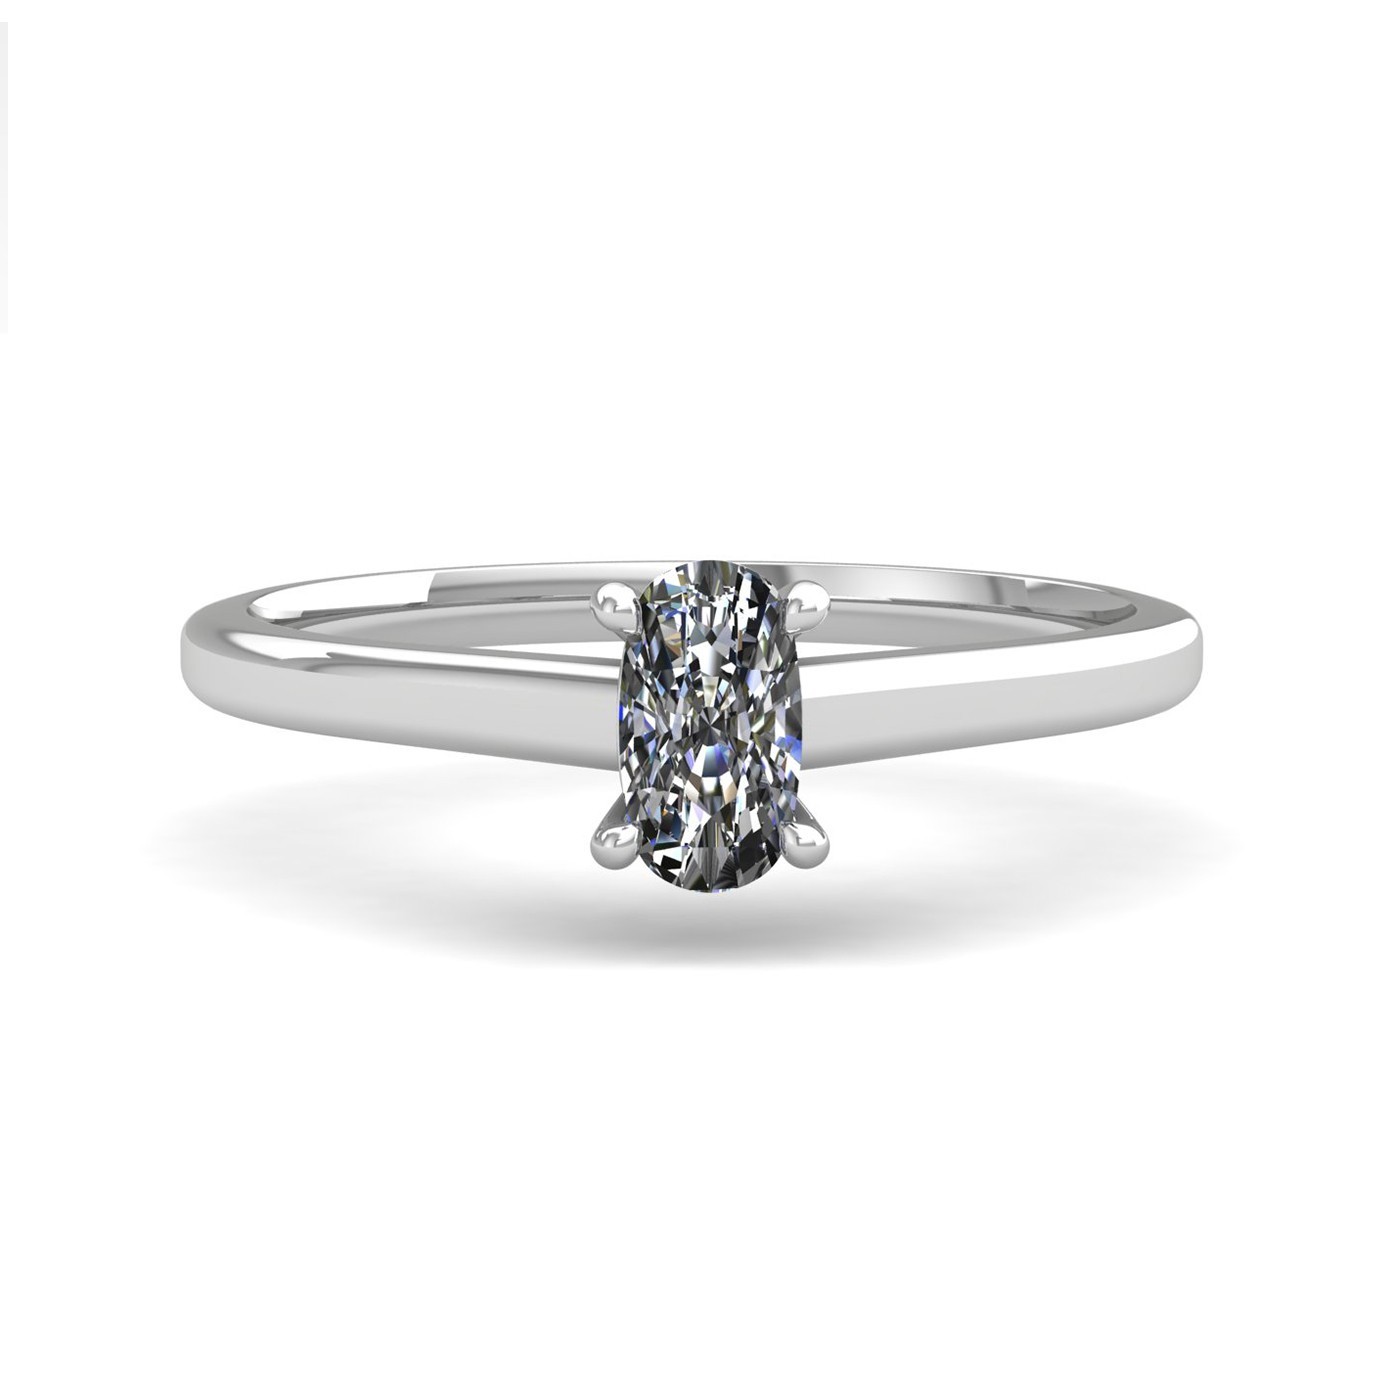 18k white gold  0,30 ct 4 prongs solitaire elongated cushion cut diamond engagement ring with whisper thin band Photos & images